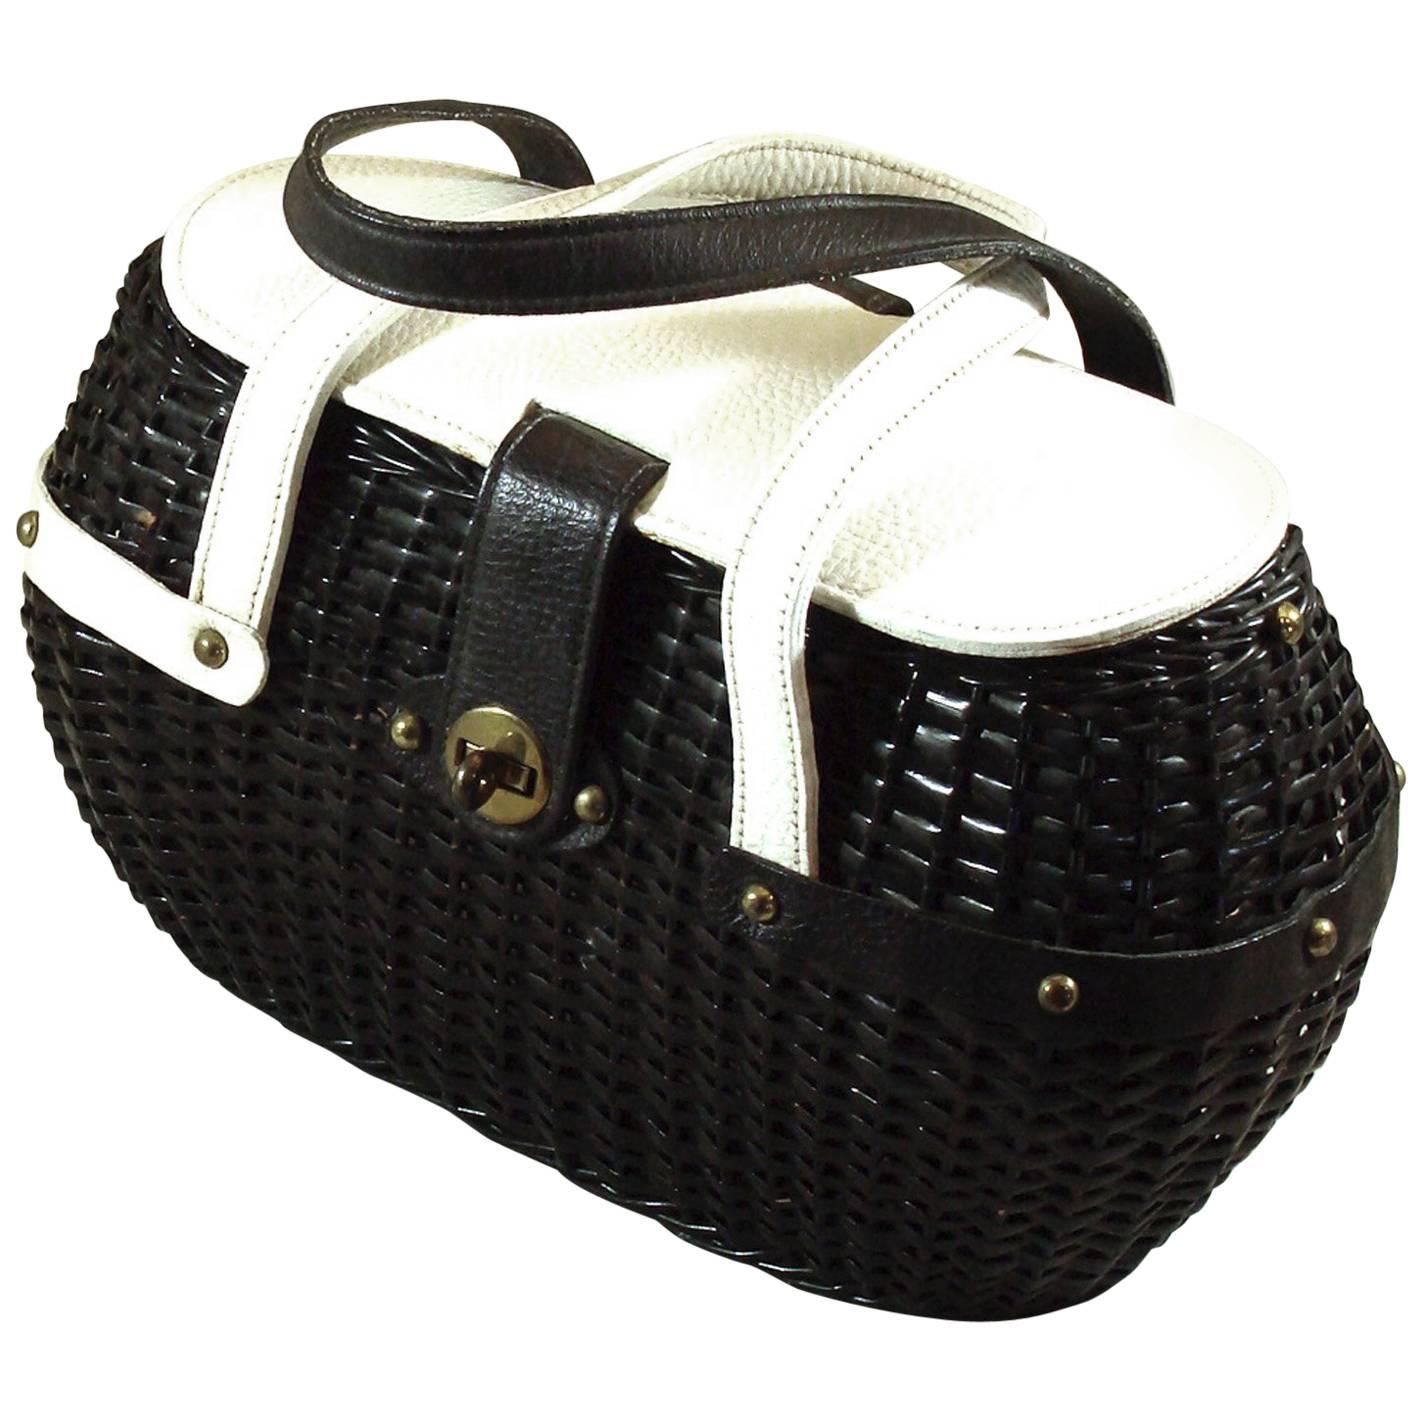 Black and White Woven Purse with Asymmetrical Leather Trim for Summer 